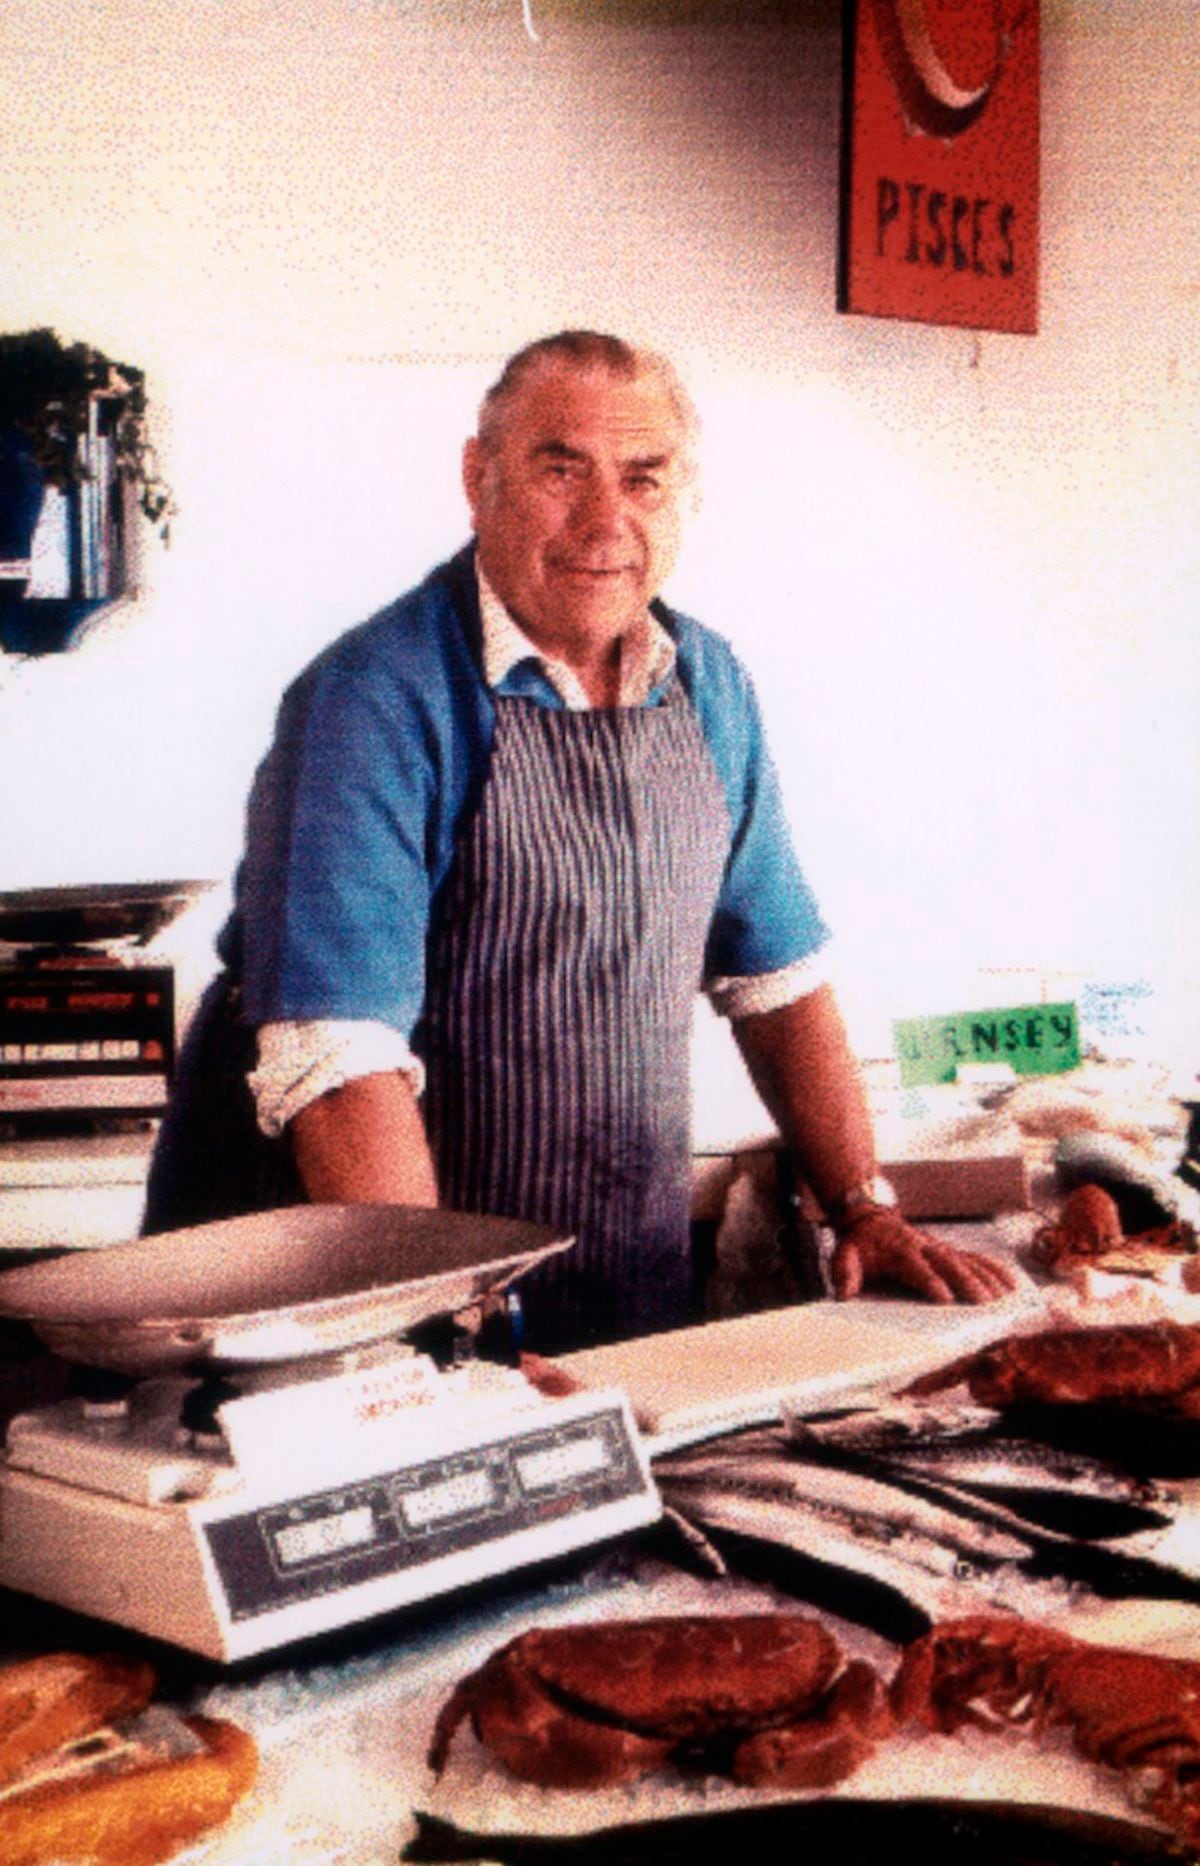 Peter Bougourd in the early 90s in his Bridge fishmongers. (32054063)